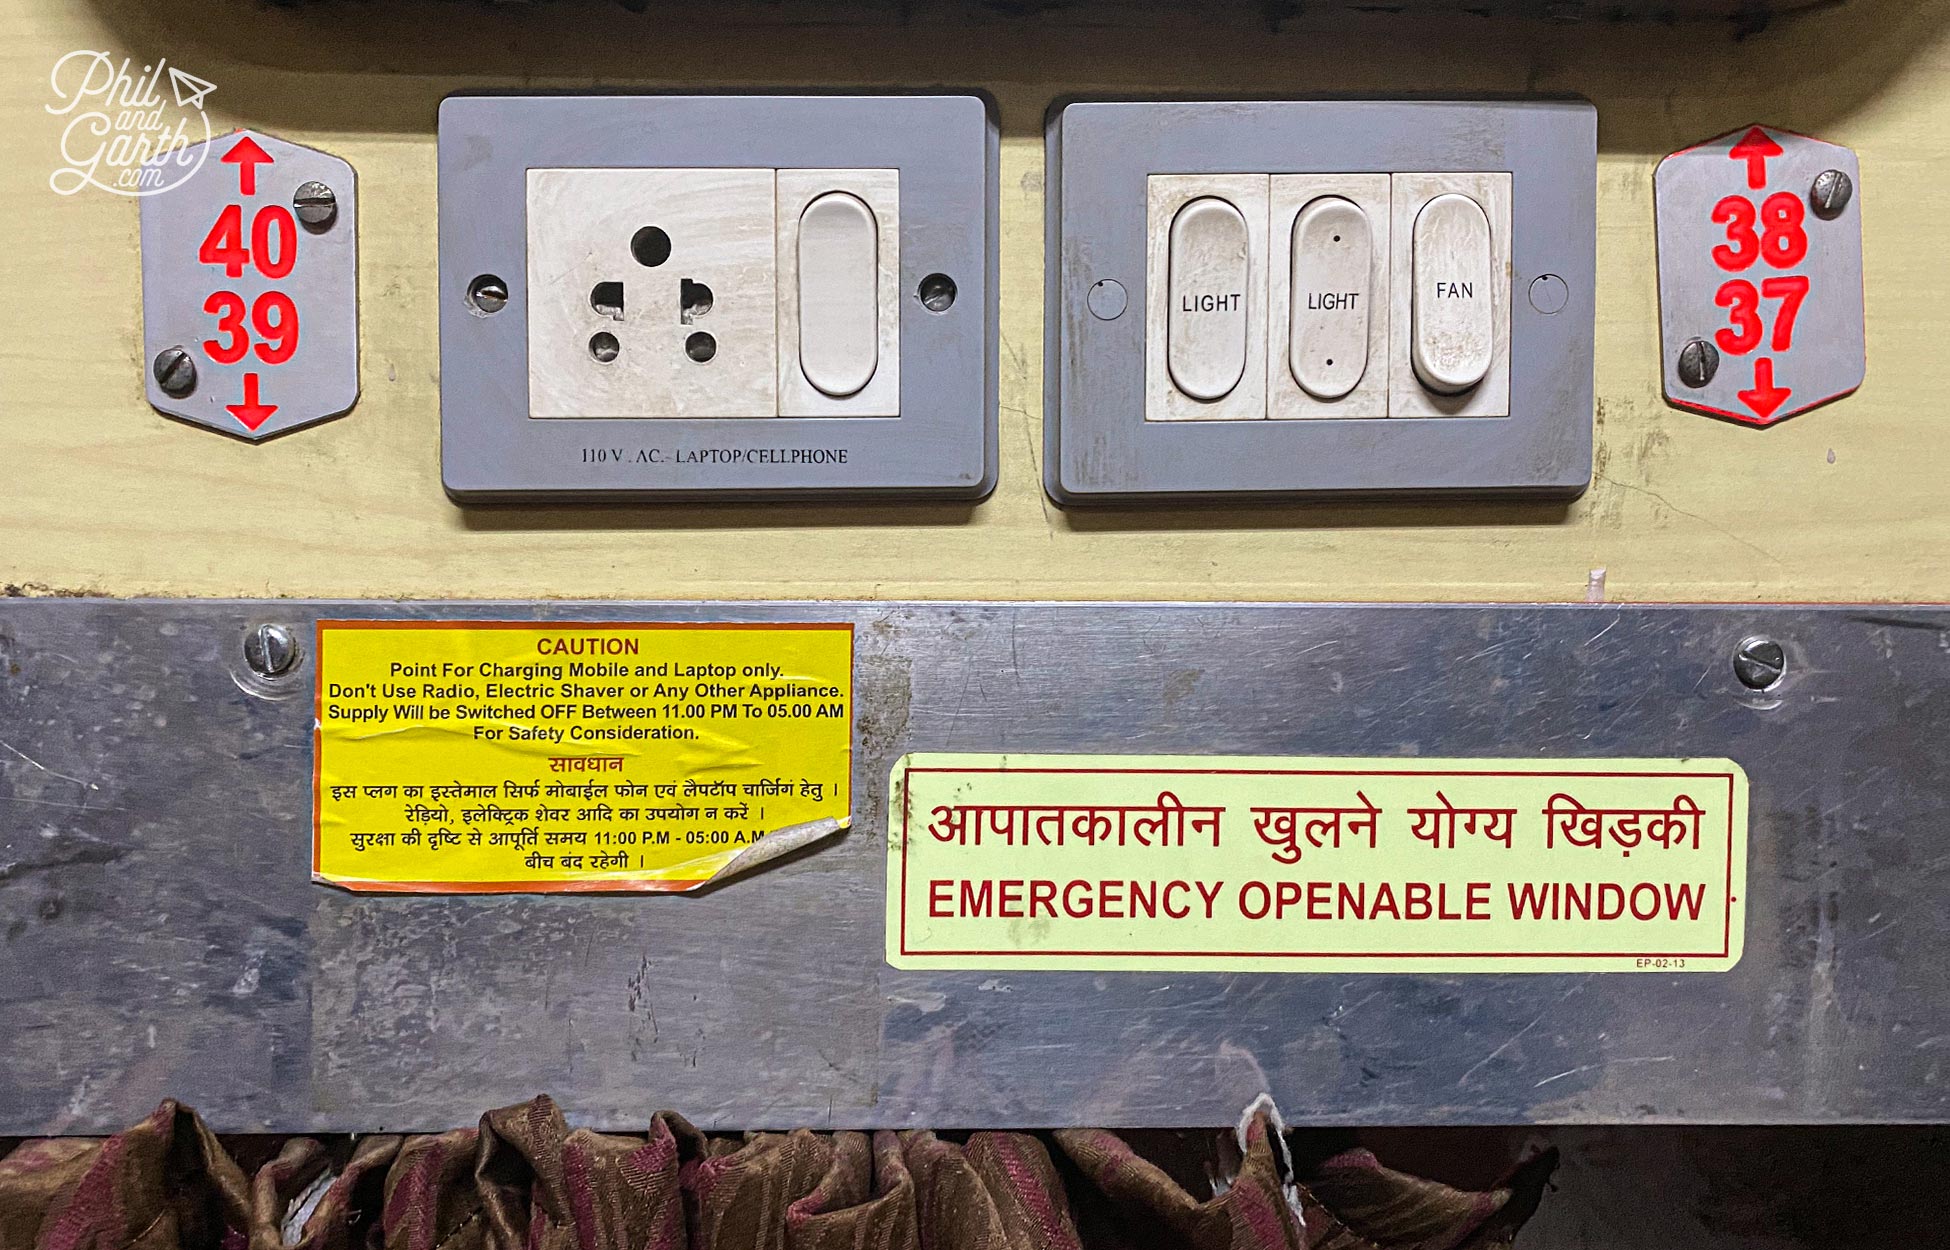 Electricity plug sockets are available on AC2 & AC3 air conditioned carriages underneath the windows